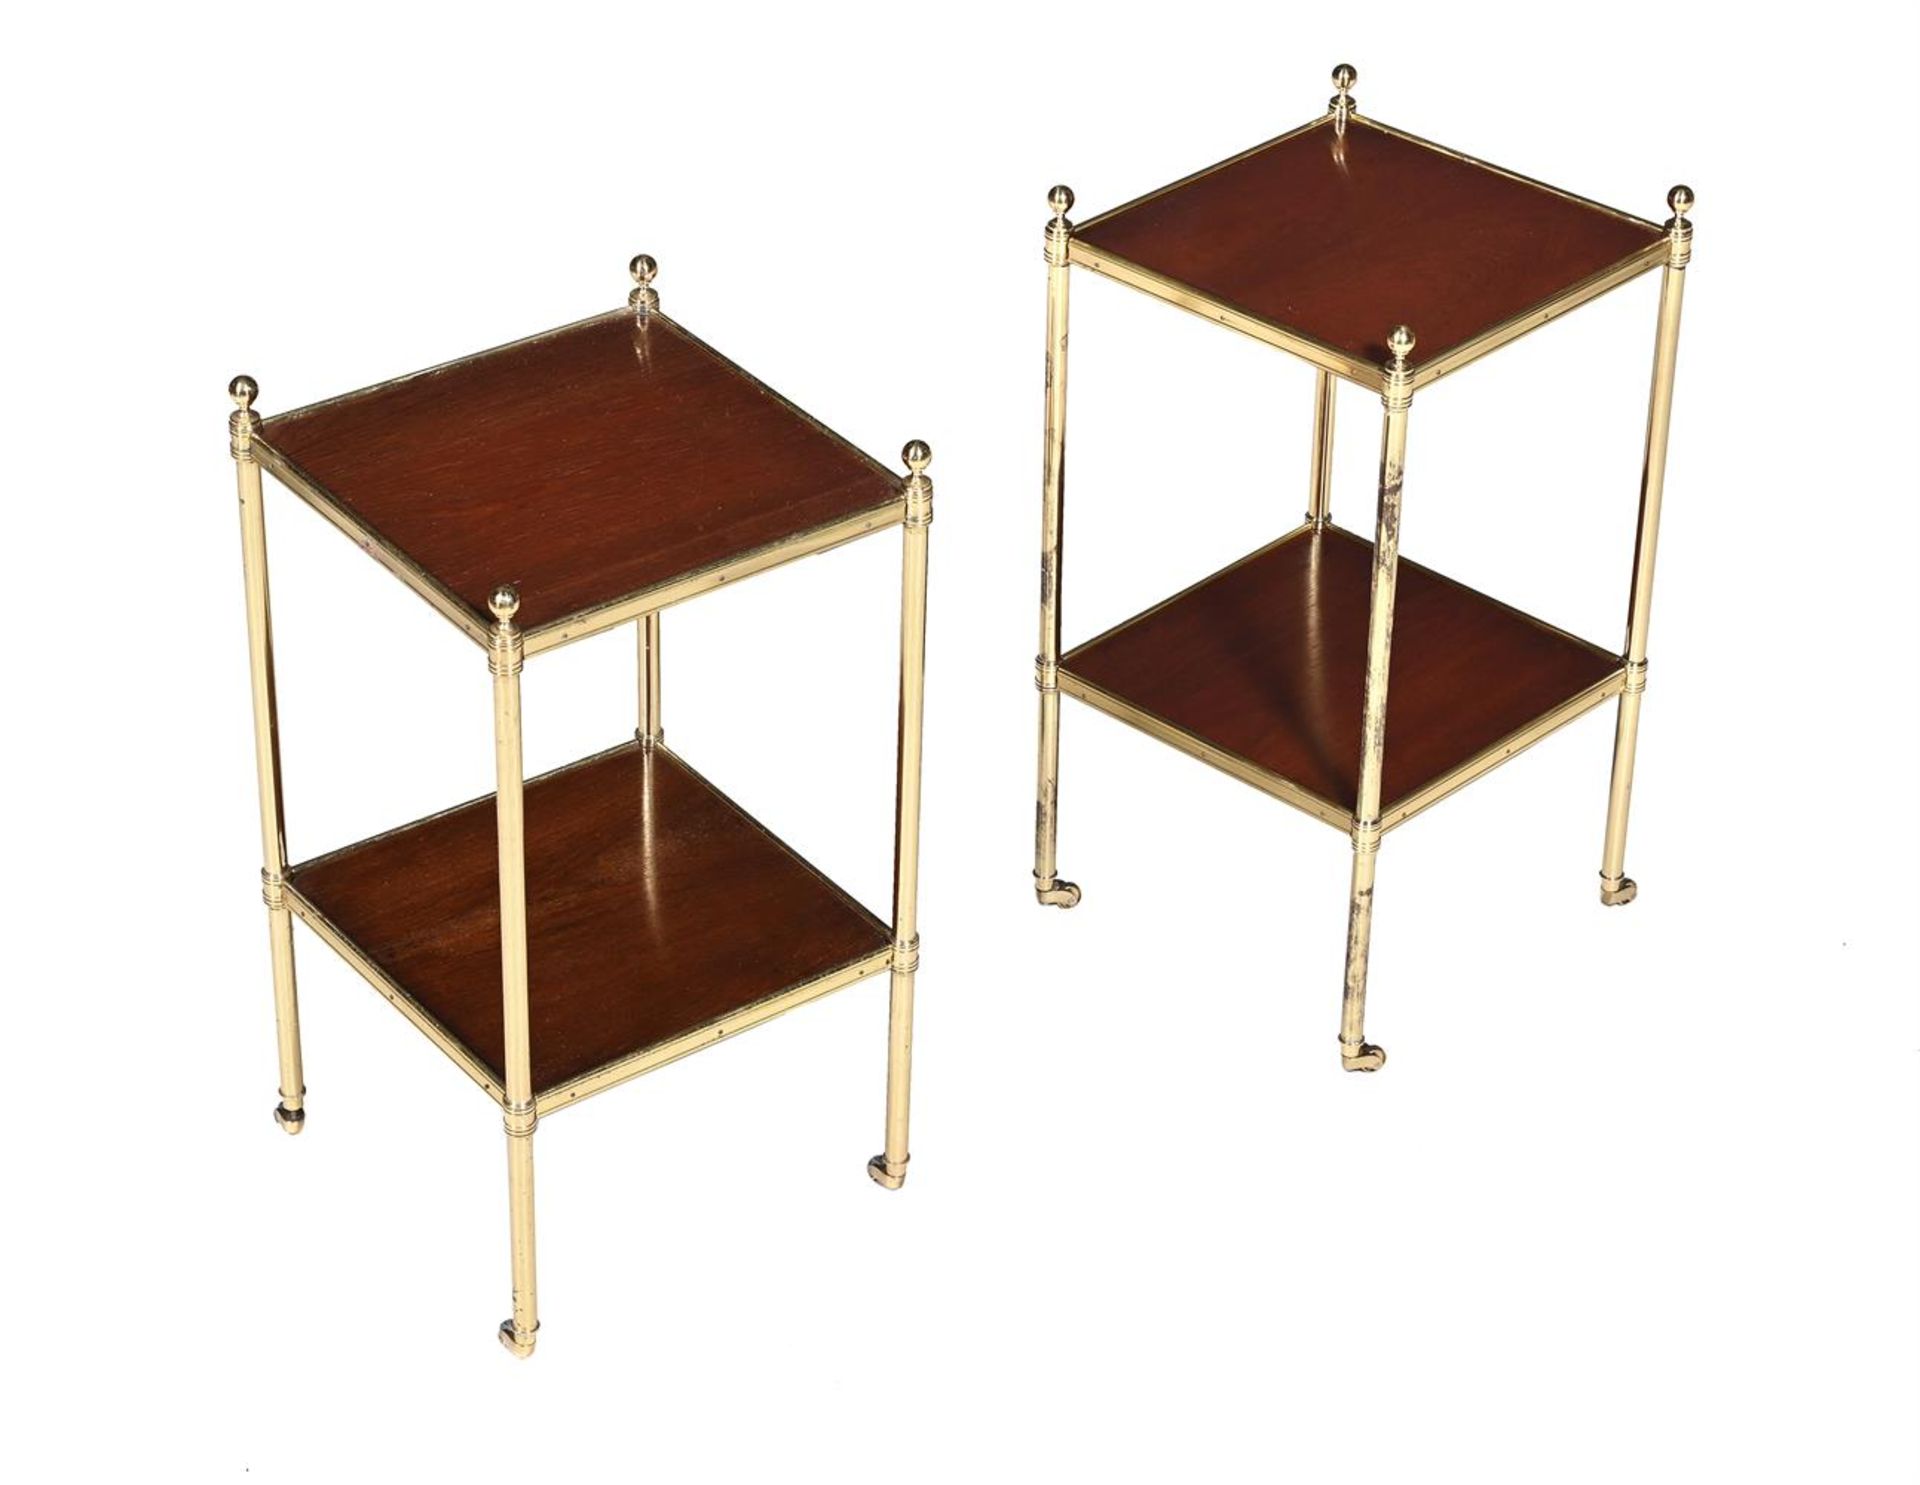 A PAIR OF MAHOGANY AND GILT METAL TWO-TIER ETAGERES, IN REGENCY STYLE, IN THE MANNER OF MALLETT